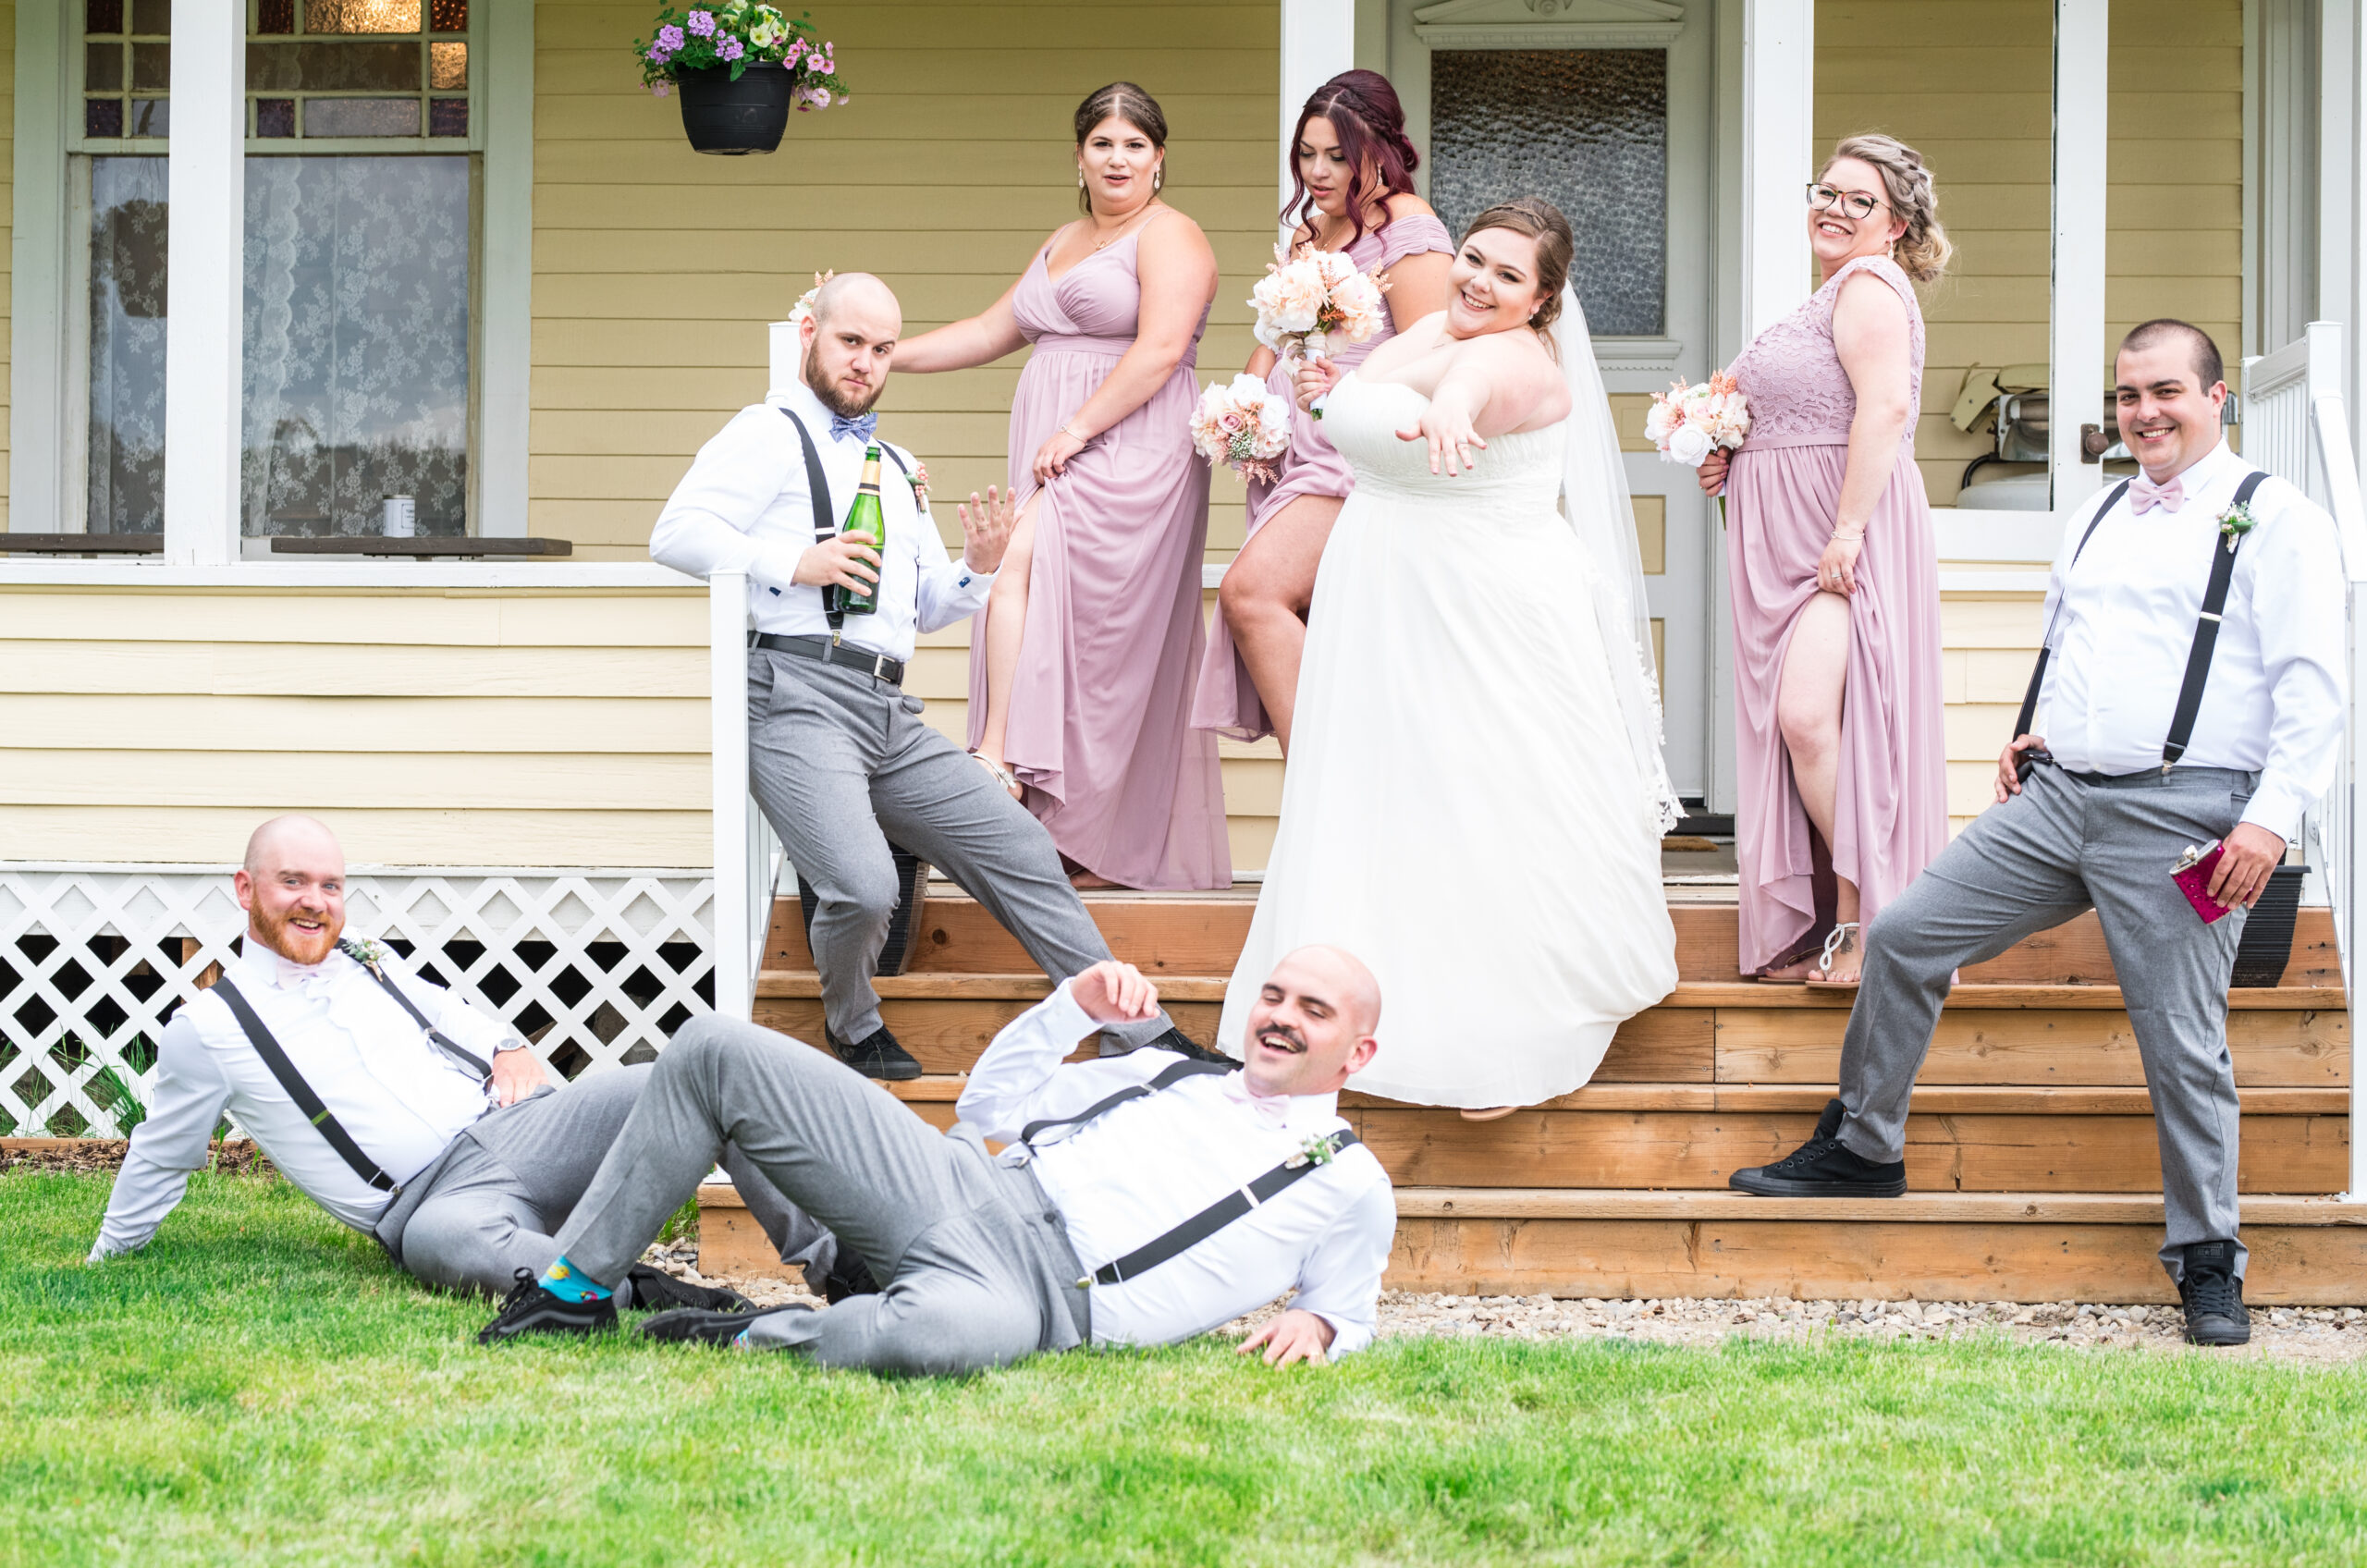 Weddings are a time to have fun. The Historic Home is a beautiful addition to this Picture Perfect Wedding Venue Property